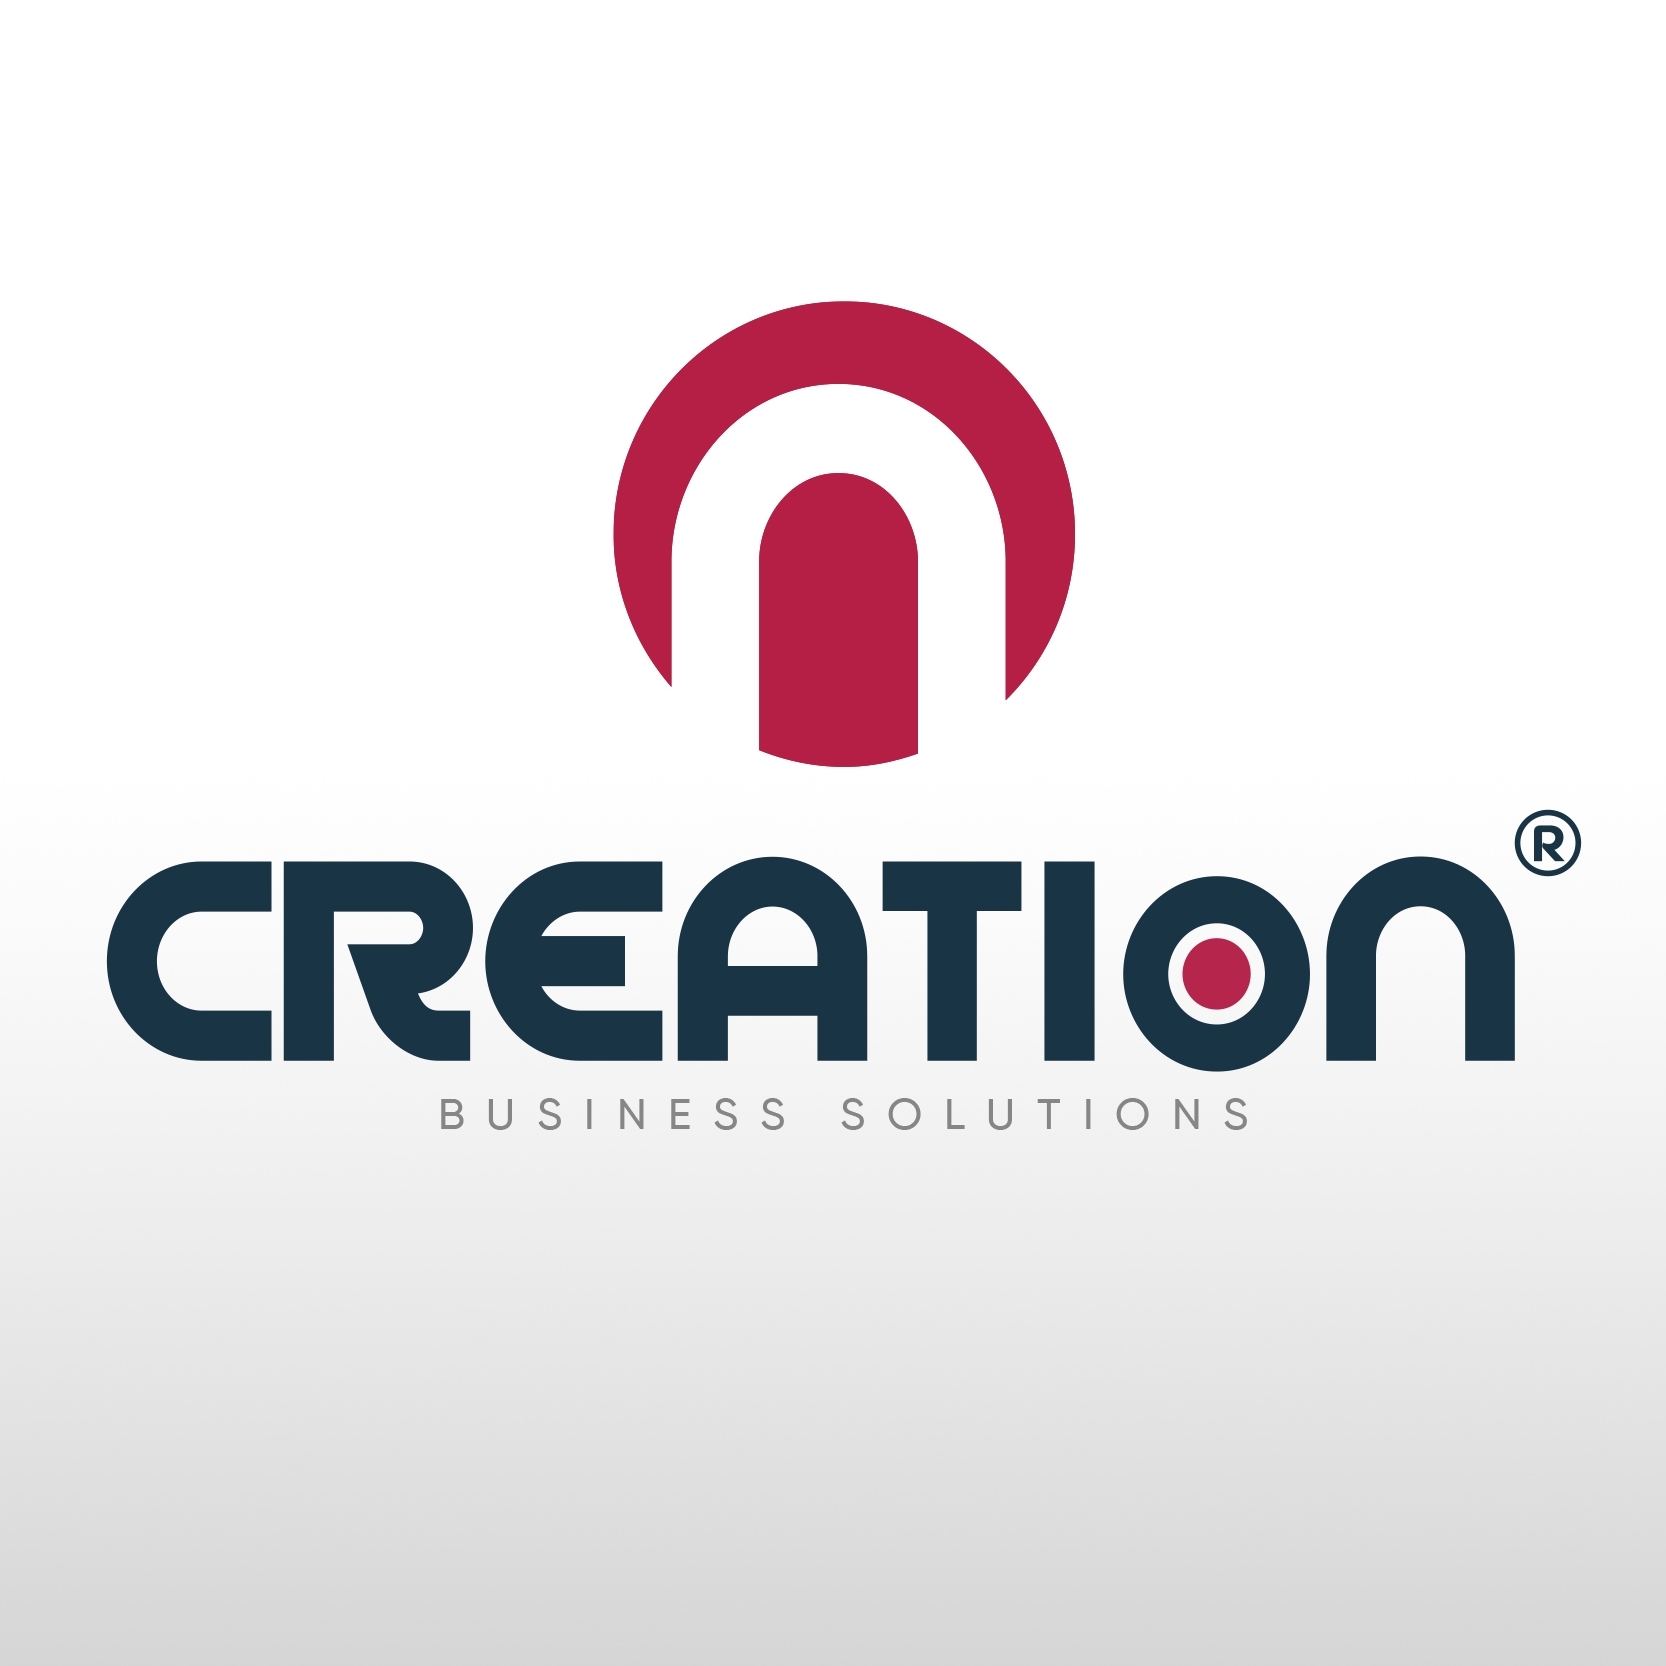 Oncreation